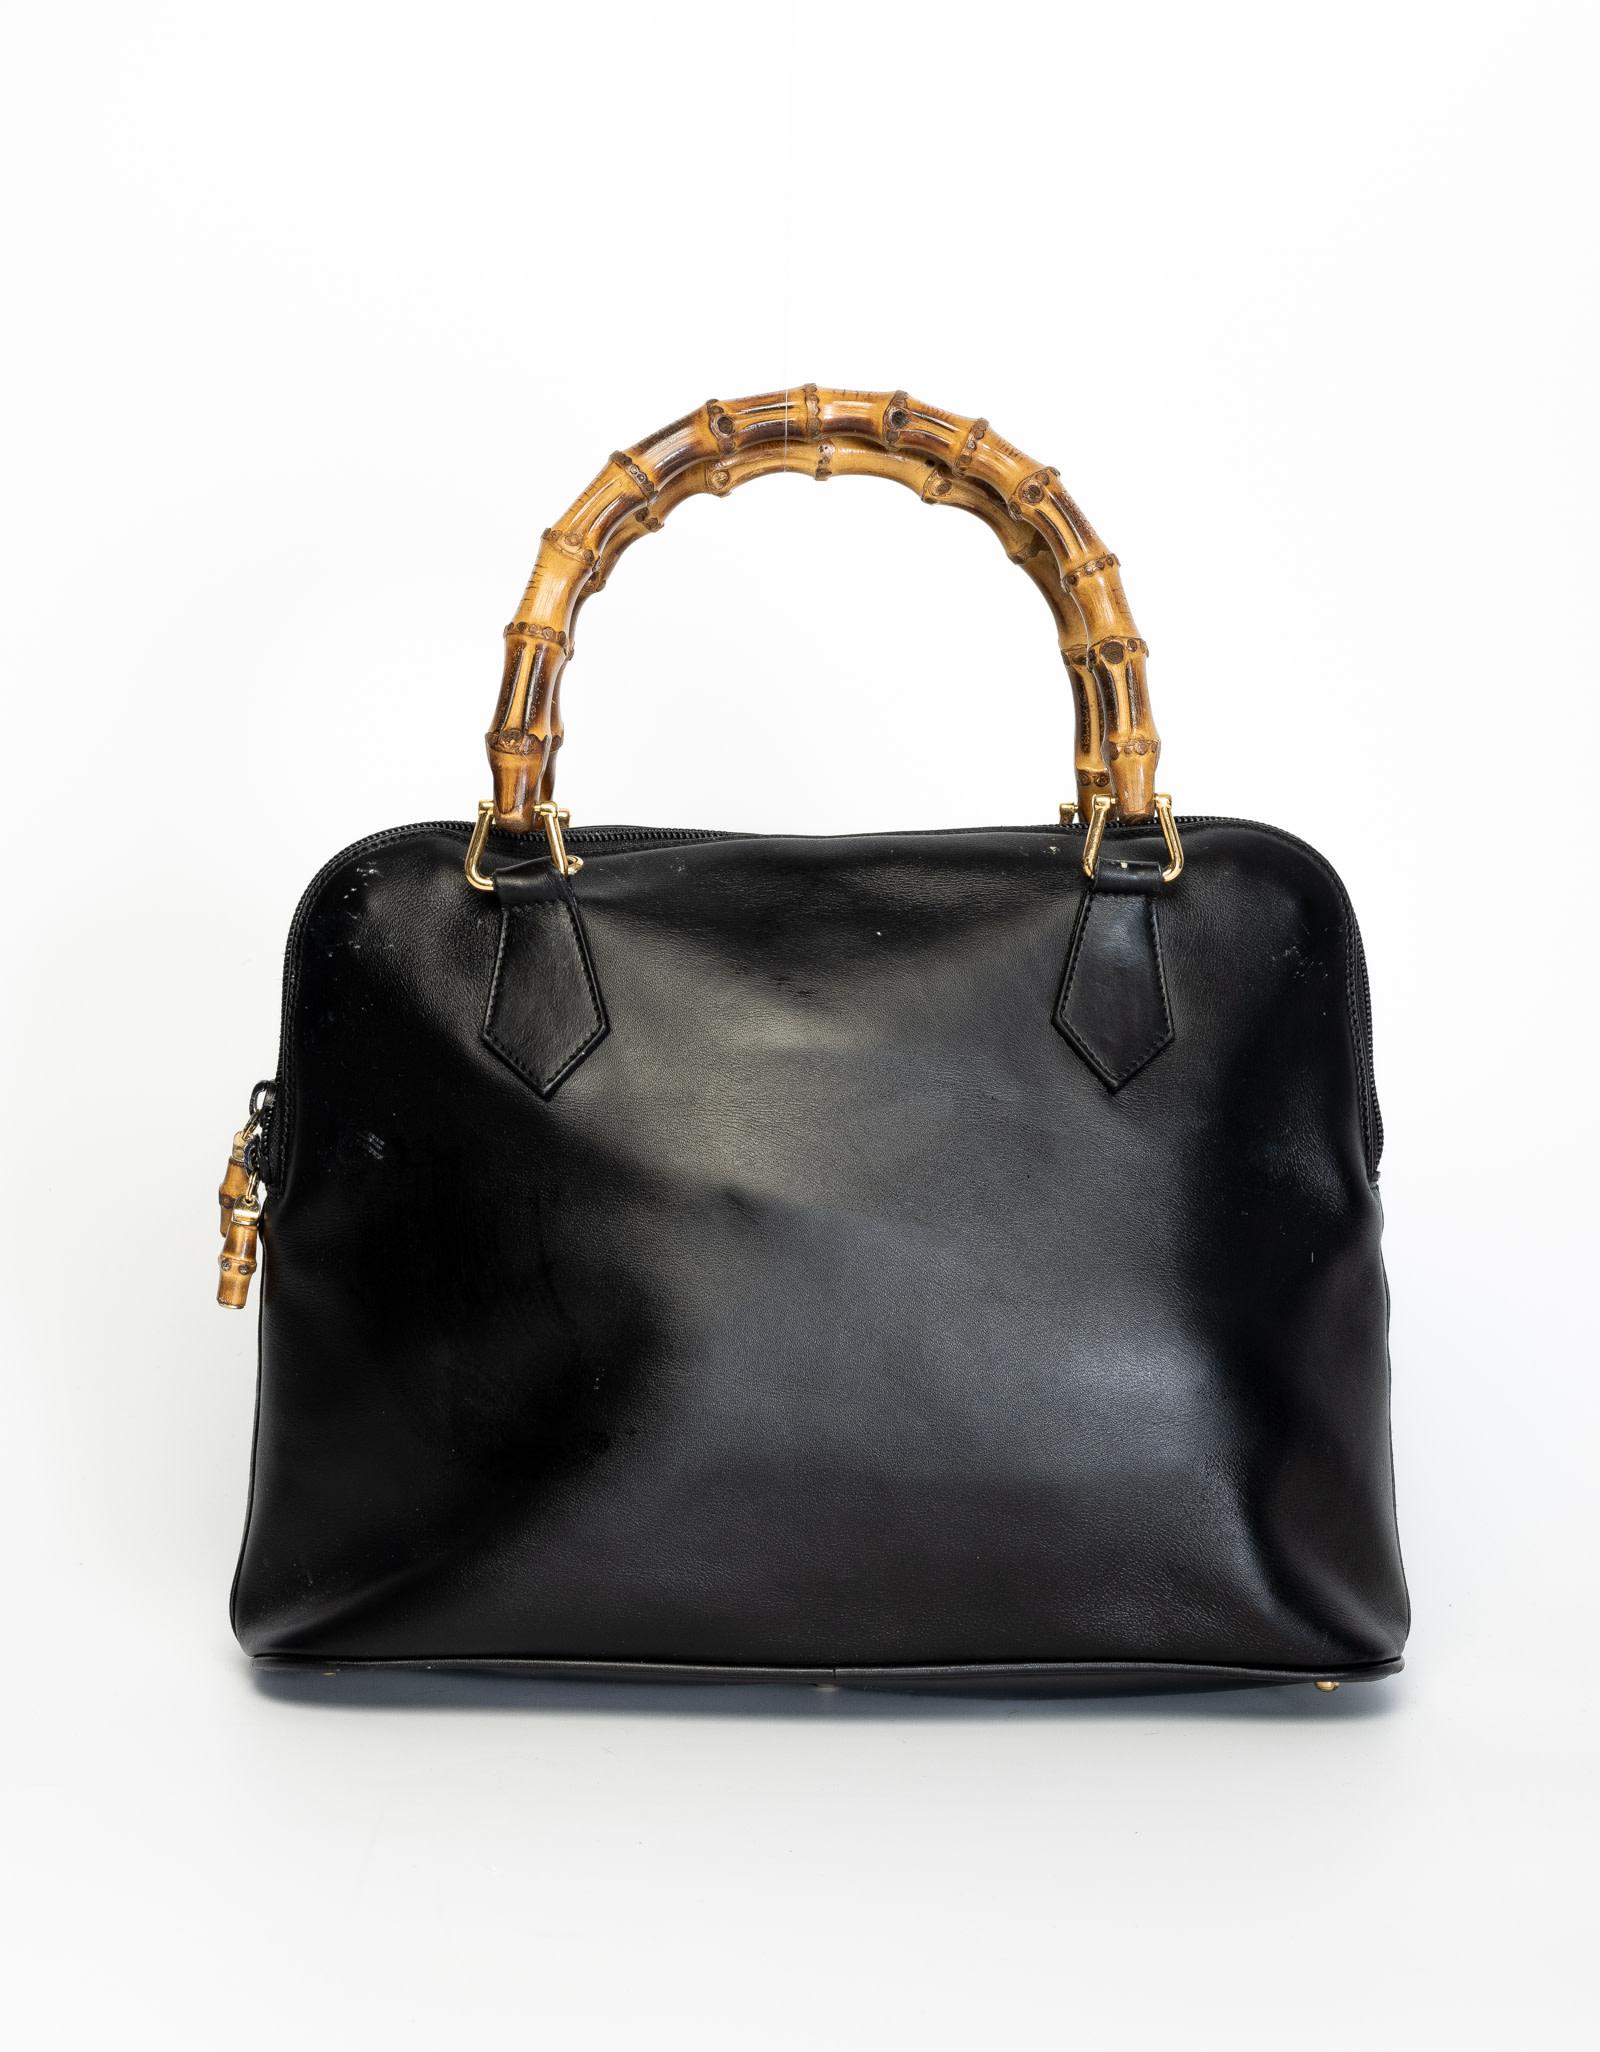 This Gucci handbag is made of leather with a top zipper and bamboo handles with a leather interior.

COLOR: Black
MATERIAL: Leather with bamboo top handle
ITEM CODE: 000 1448 0289
MEASURES: H 10” x L 14” x D 5”
DROP: 6”
COMES WITH: Dust